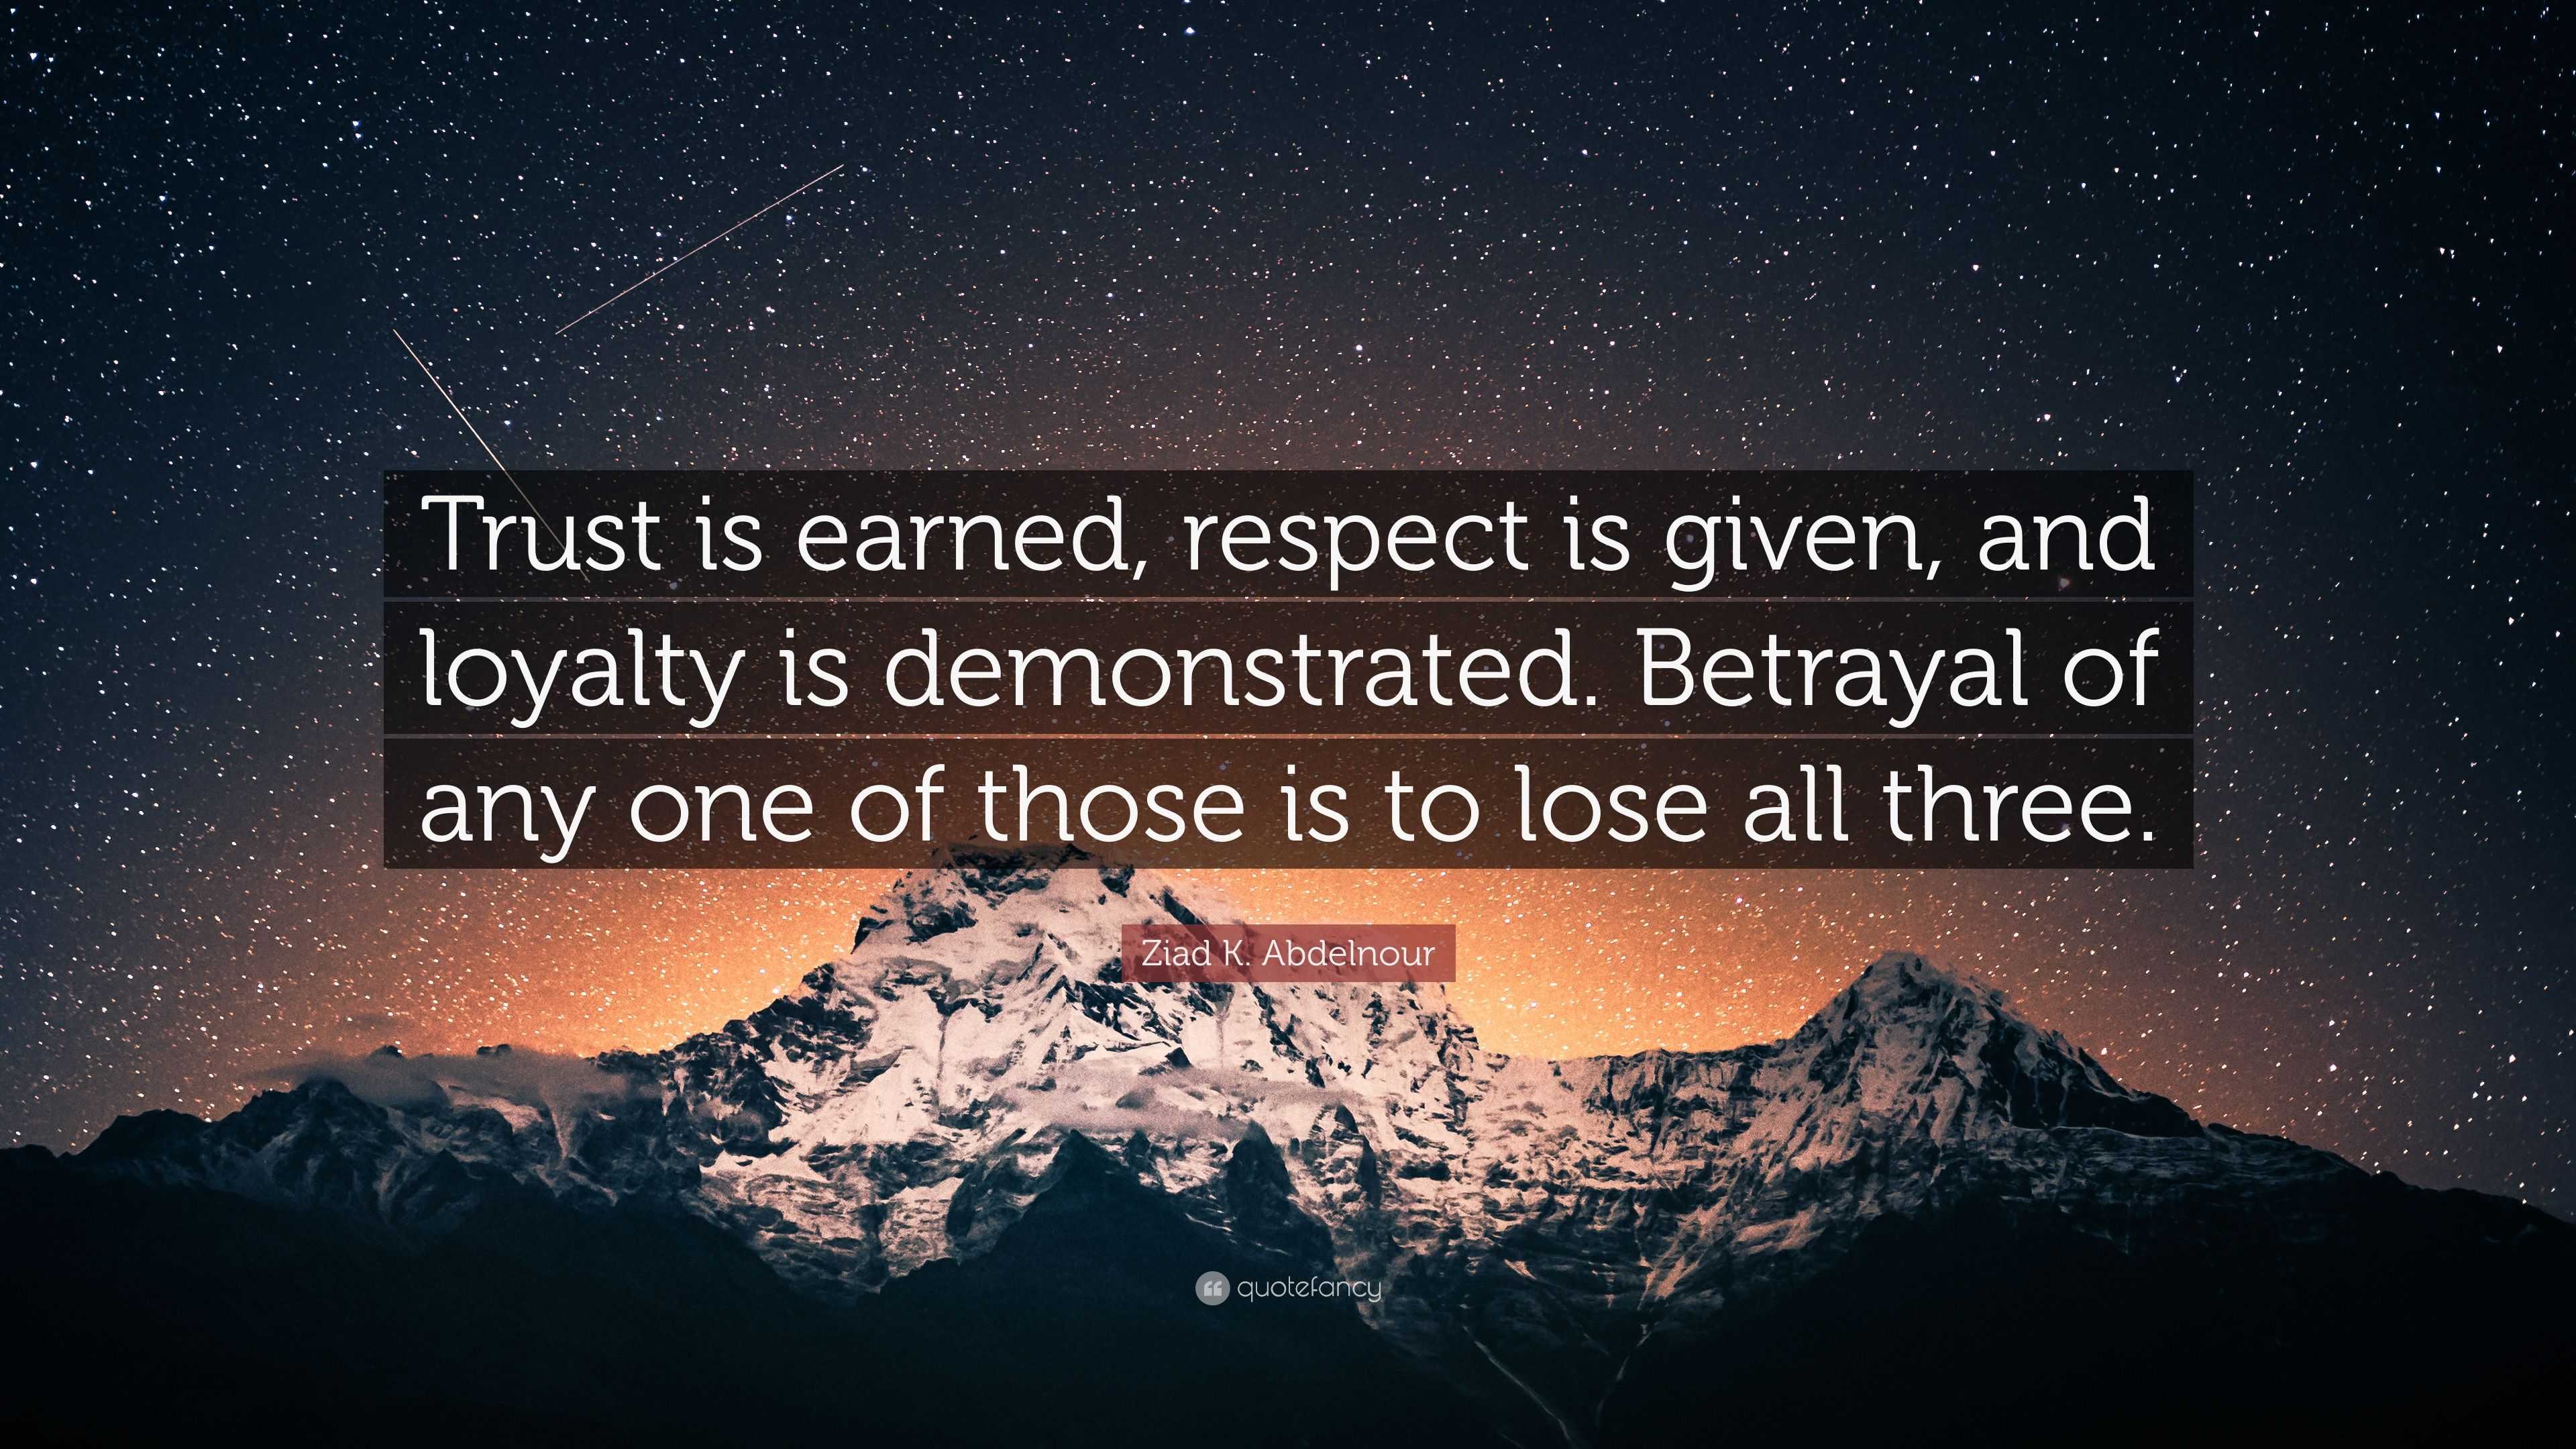 Ziad K. Abdelnour Quote: “Trust is earned, respect is given, and